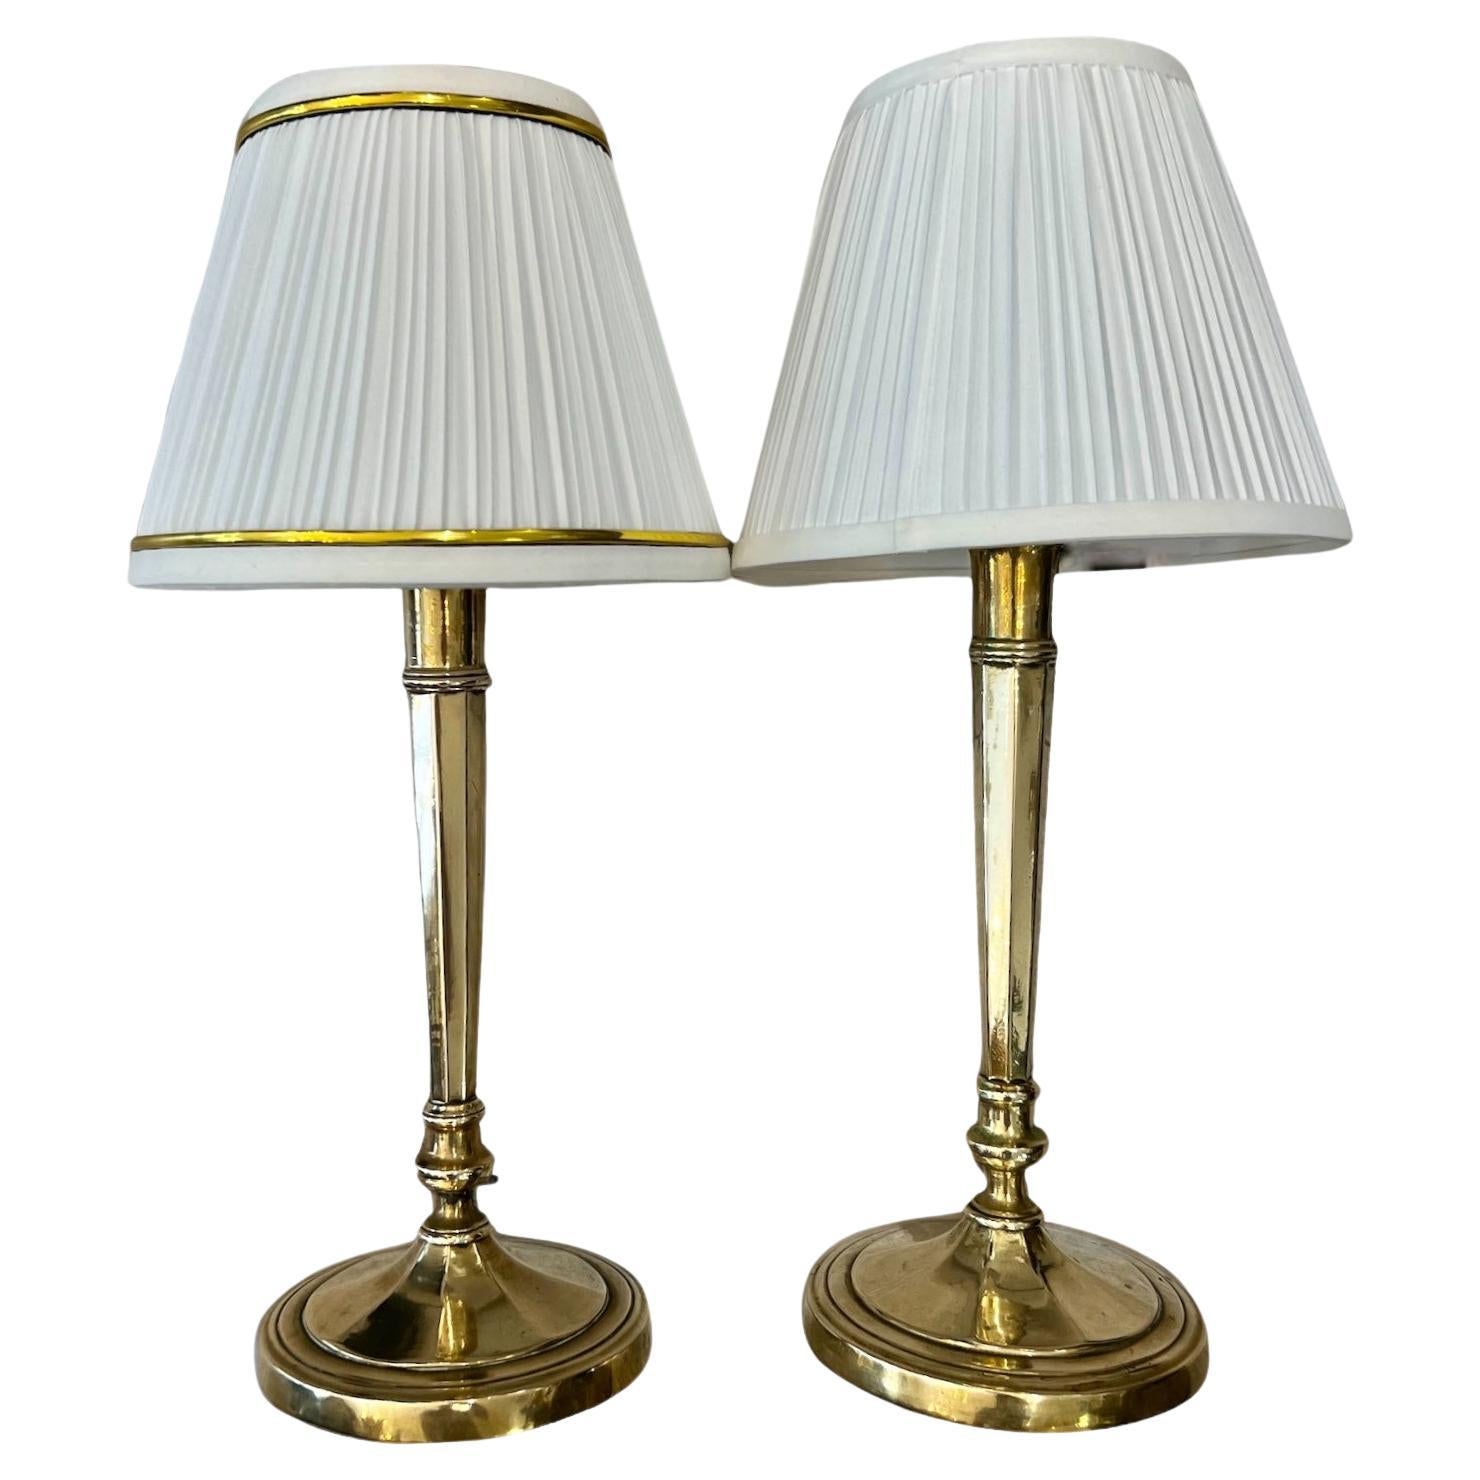 Early 19th Century Pair of Louis XVI Directoire Style Candlestick Lamps  For Sale